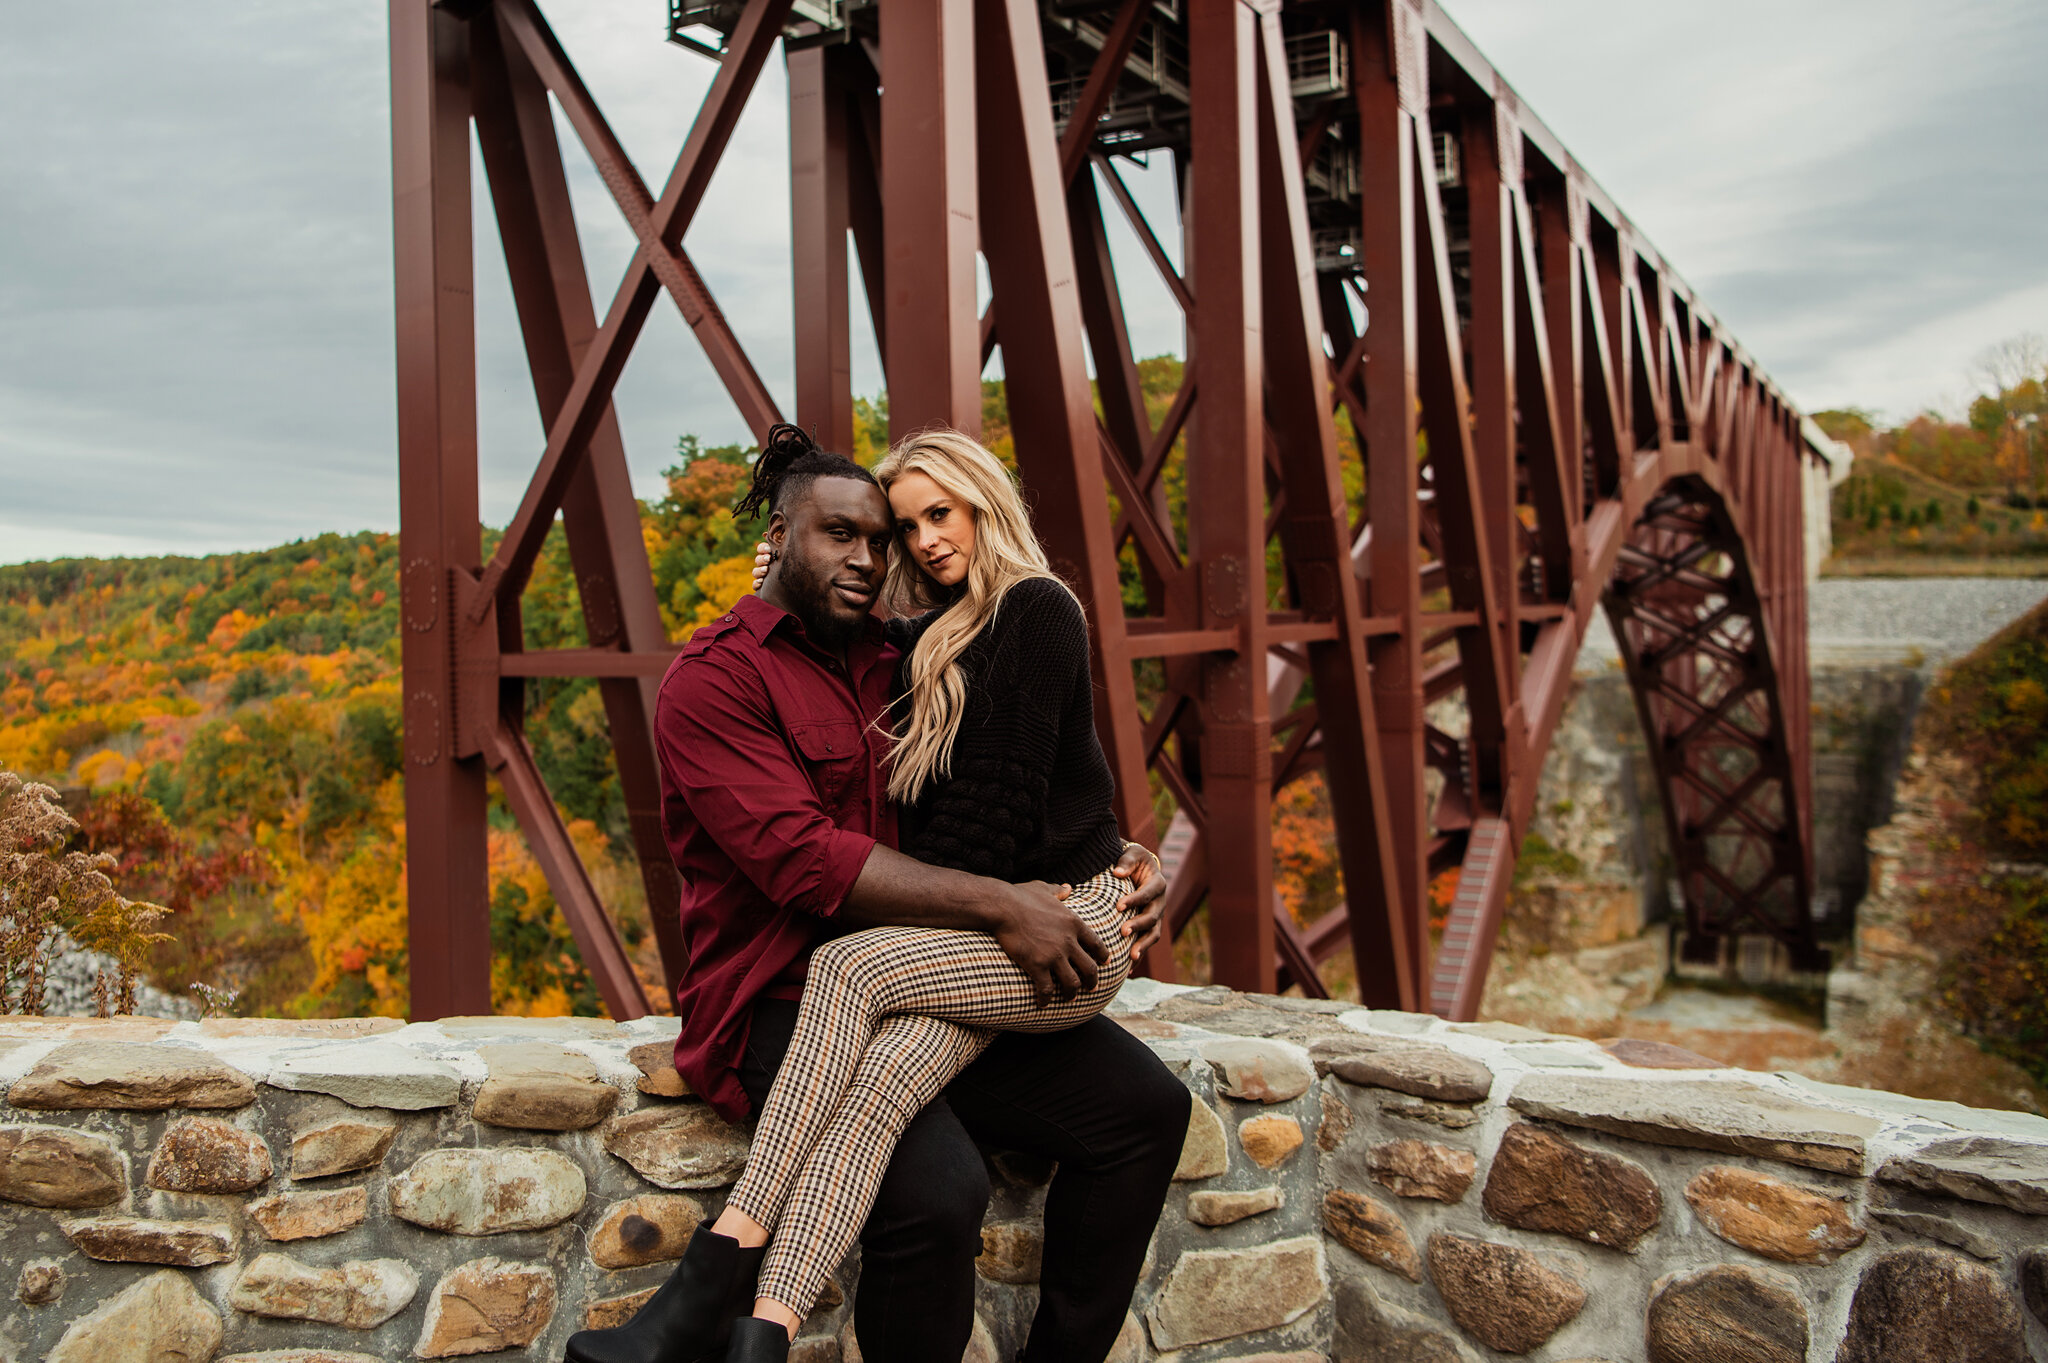 Letchworth_State_Park_Rochester_Couples_Session_JILL_STUDIO_Rochester_NY_Photographer_9416.jpg